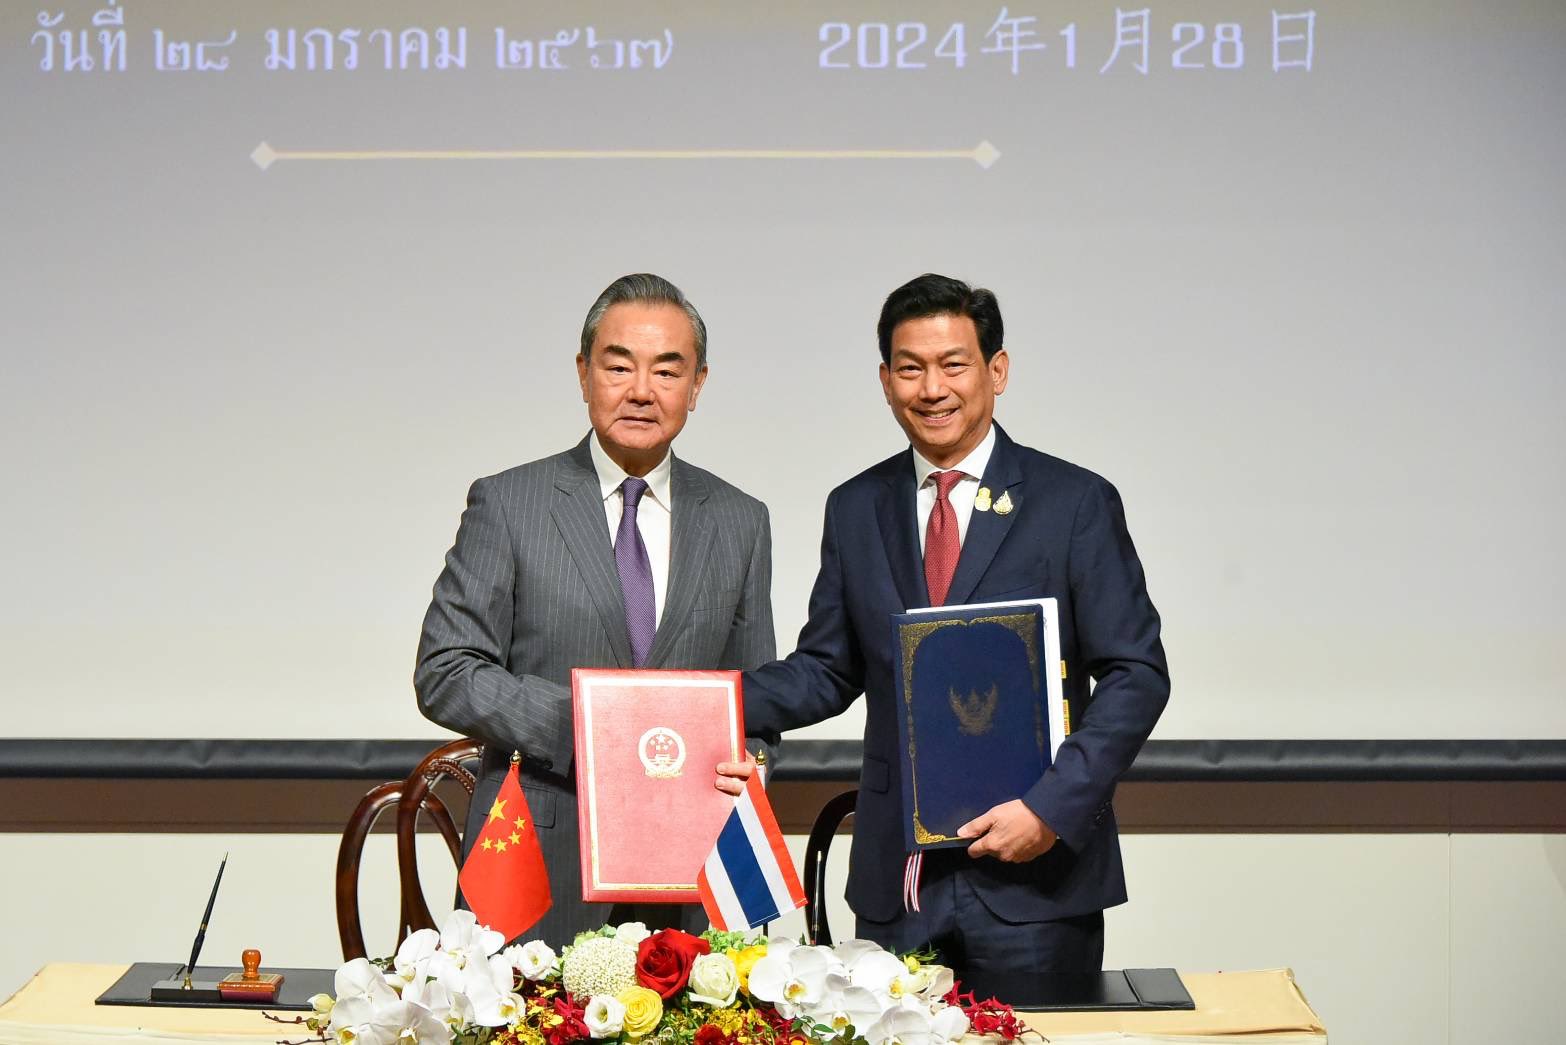 Thailand, China ink agreement granting visa-free travel for citizens